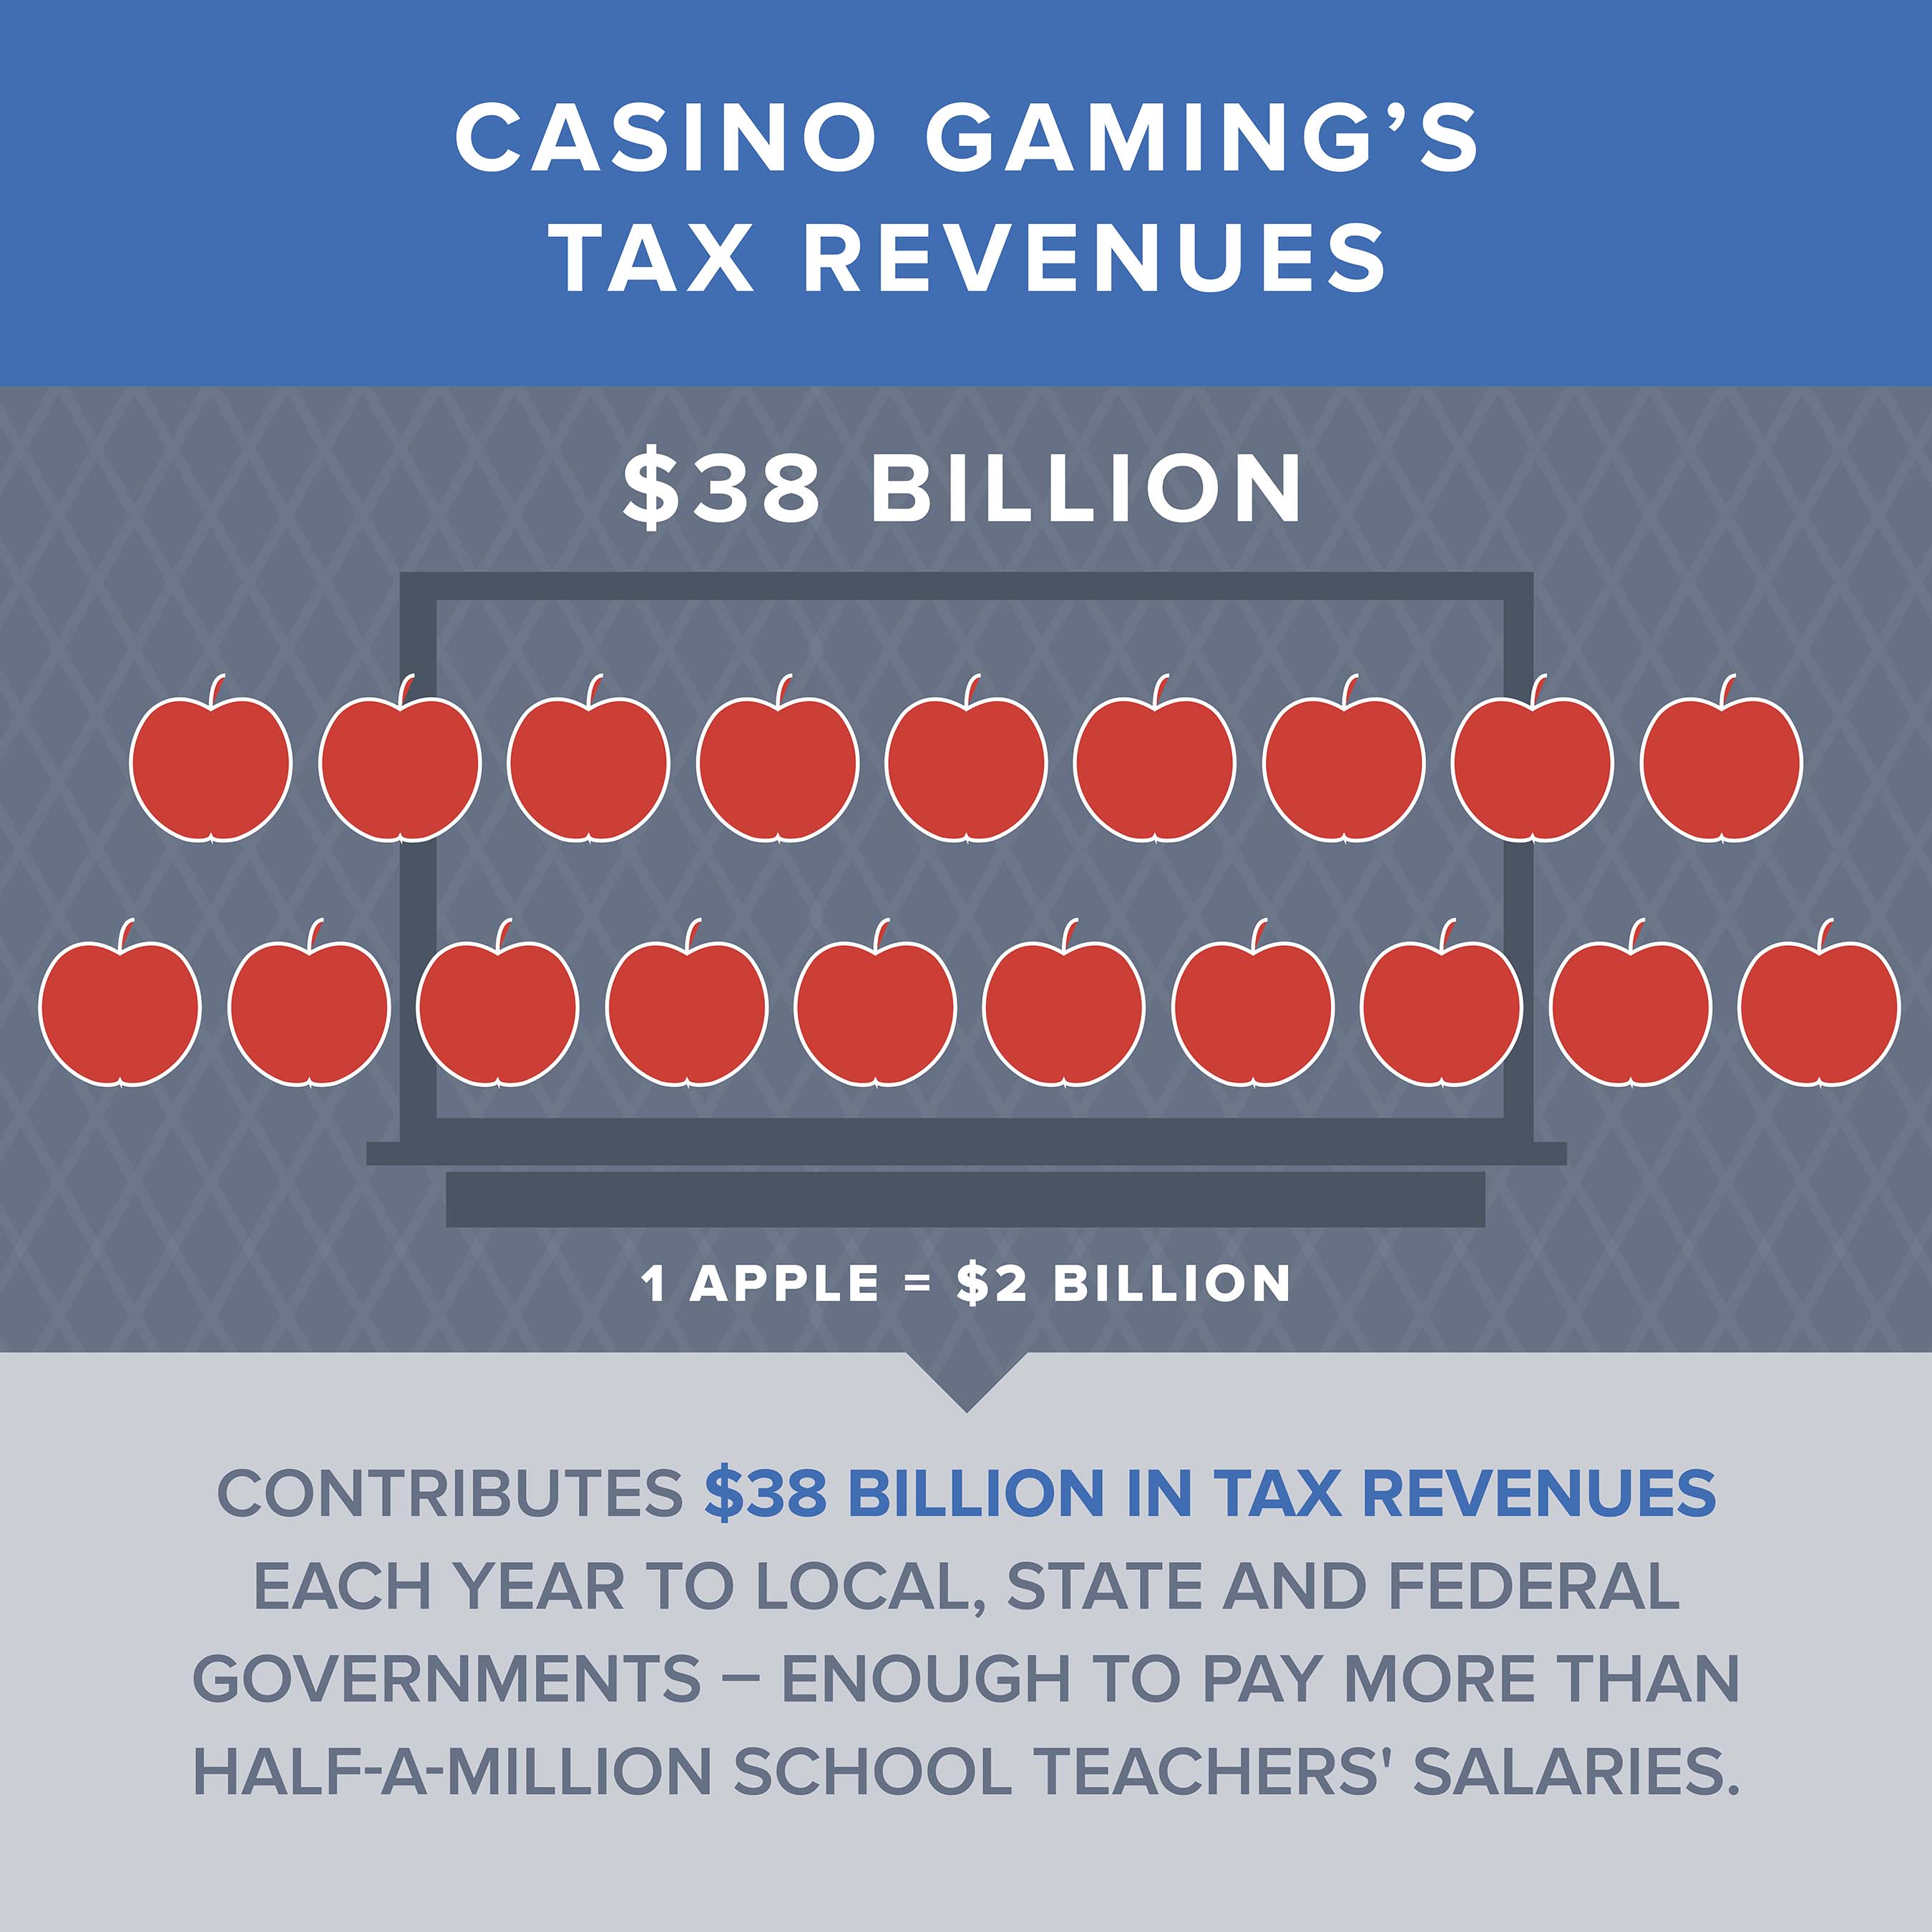 Casino gaming’s tax revenues contribute $38 billion – enough to pay more than half-a-million teachers’ salaries.